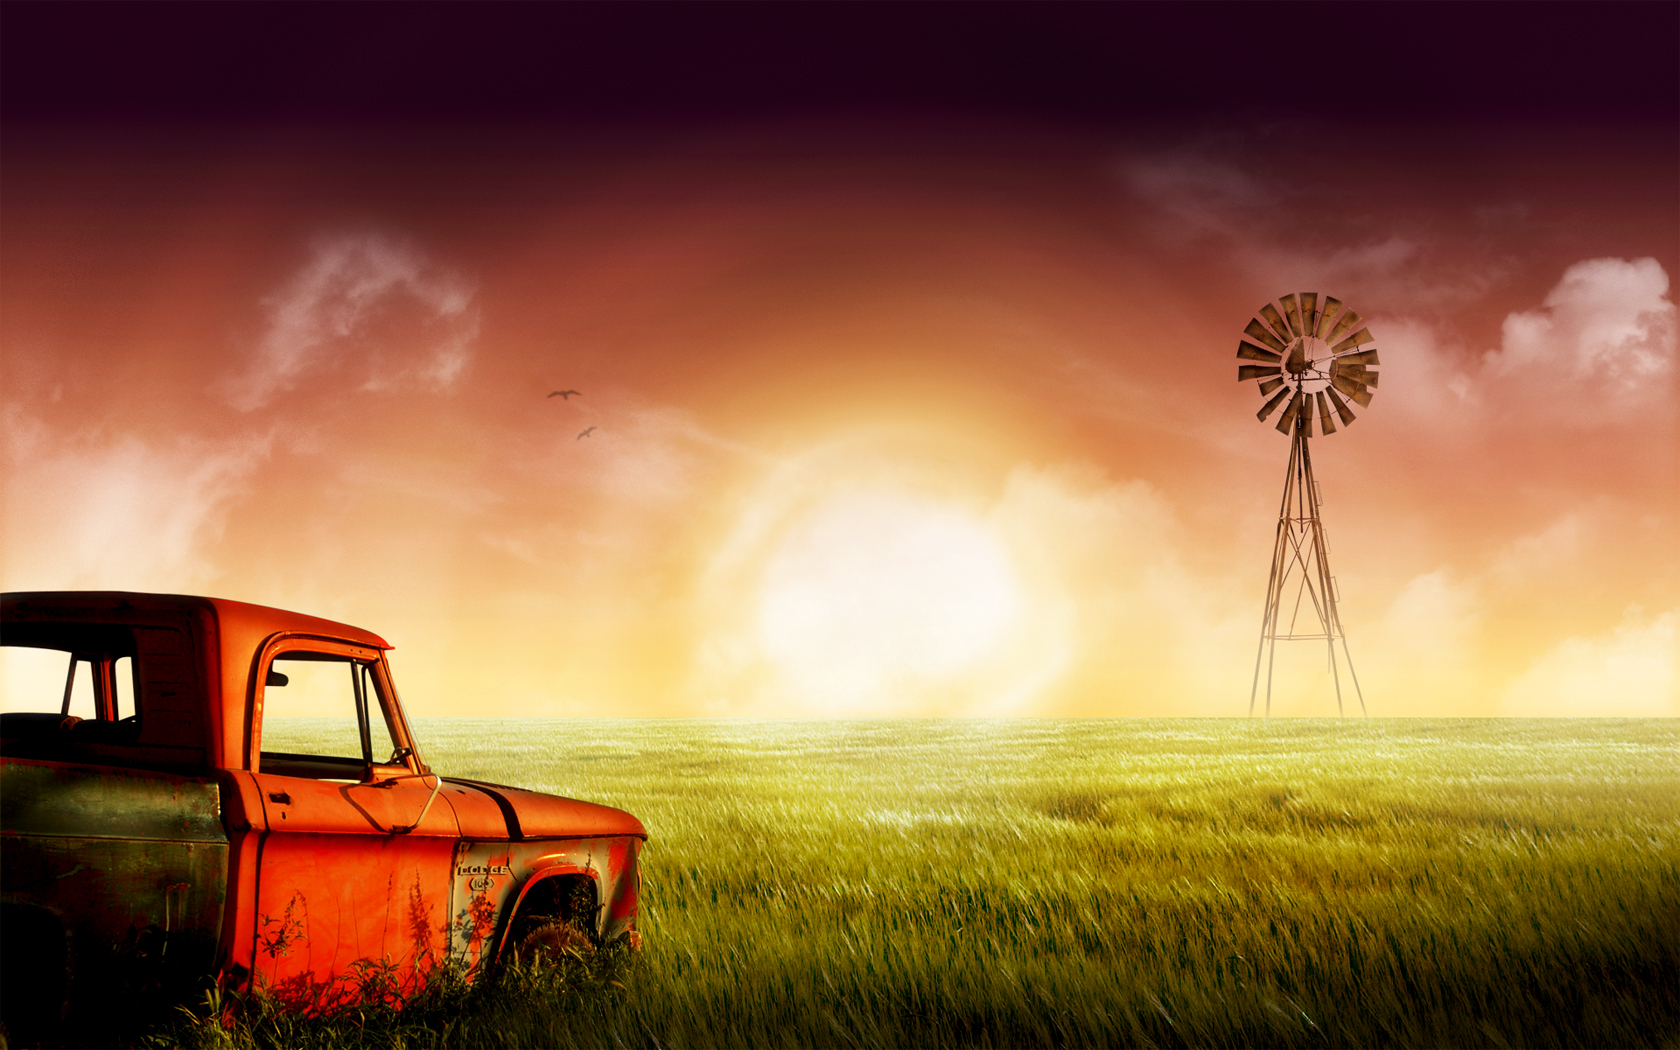 Sunset Background Images For Photoshop Editing Free Download